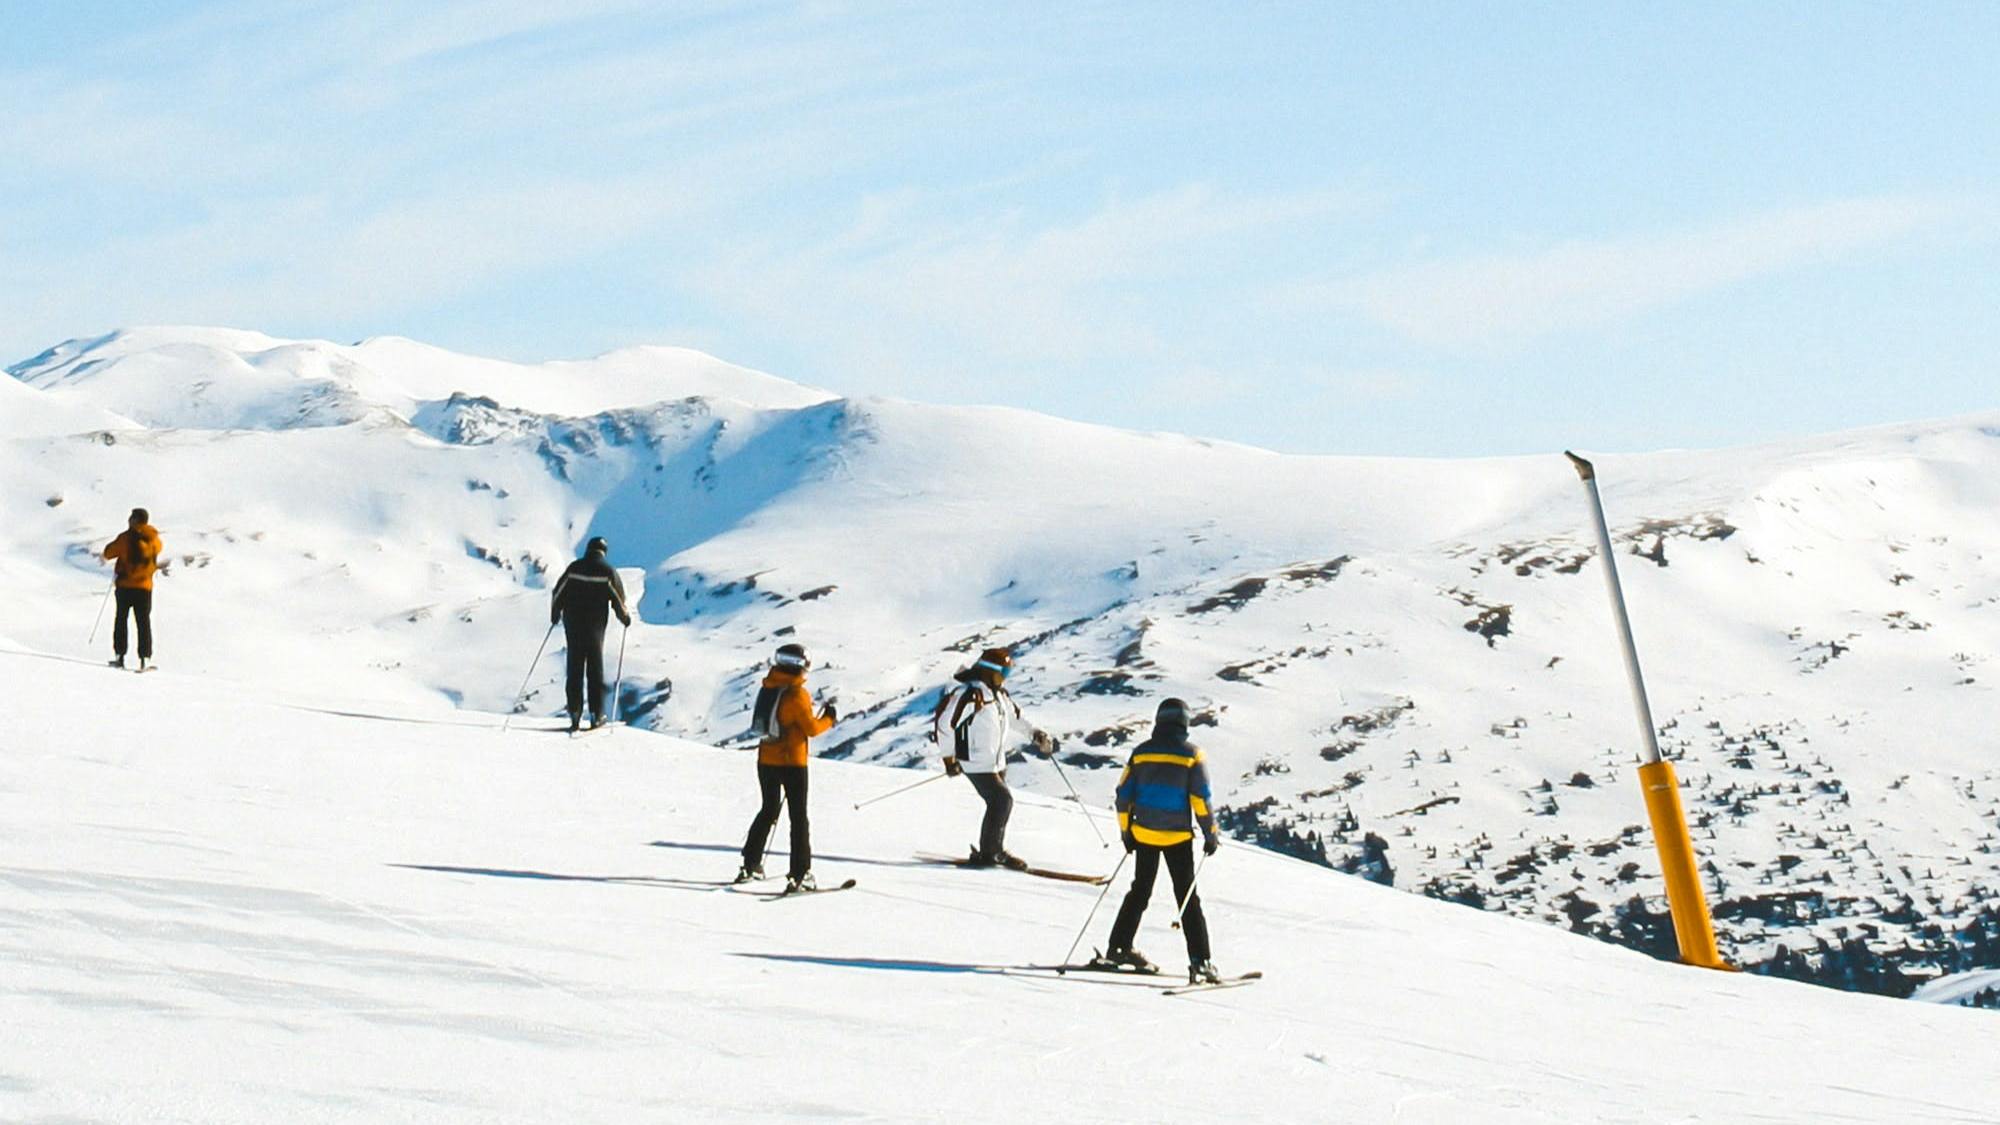 Several skiers on a ski hill.